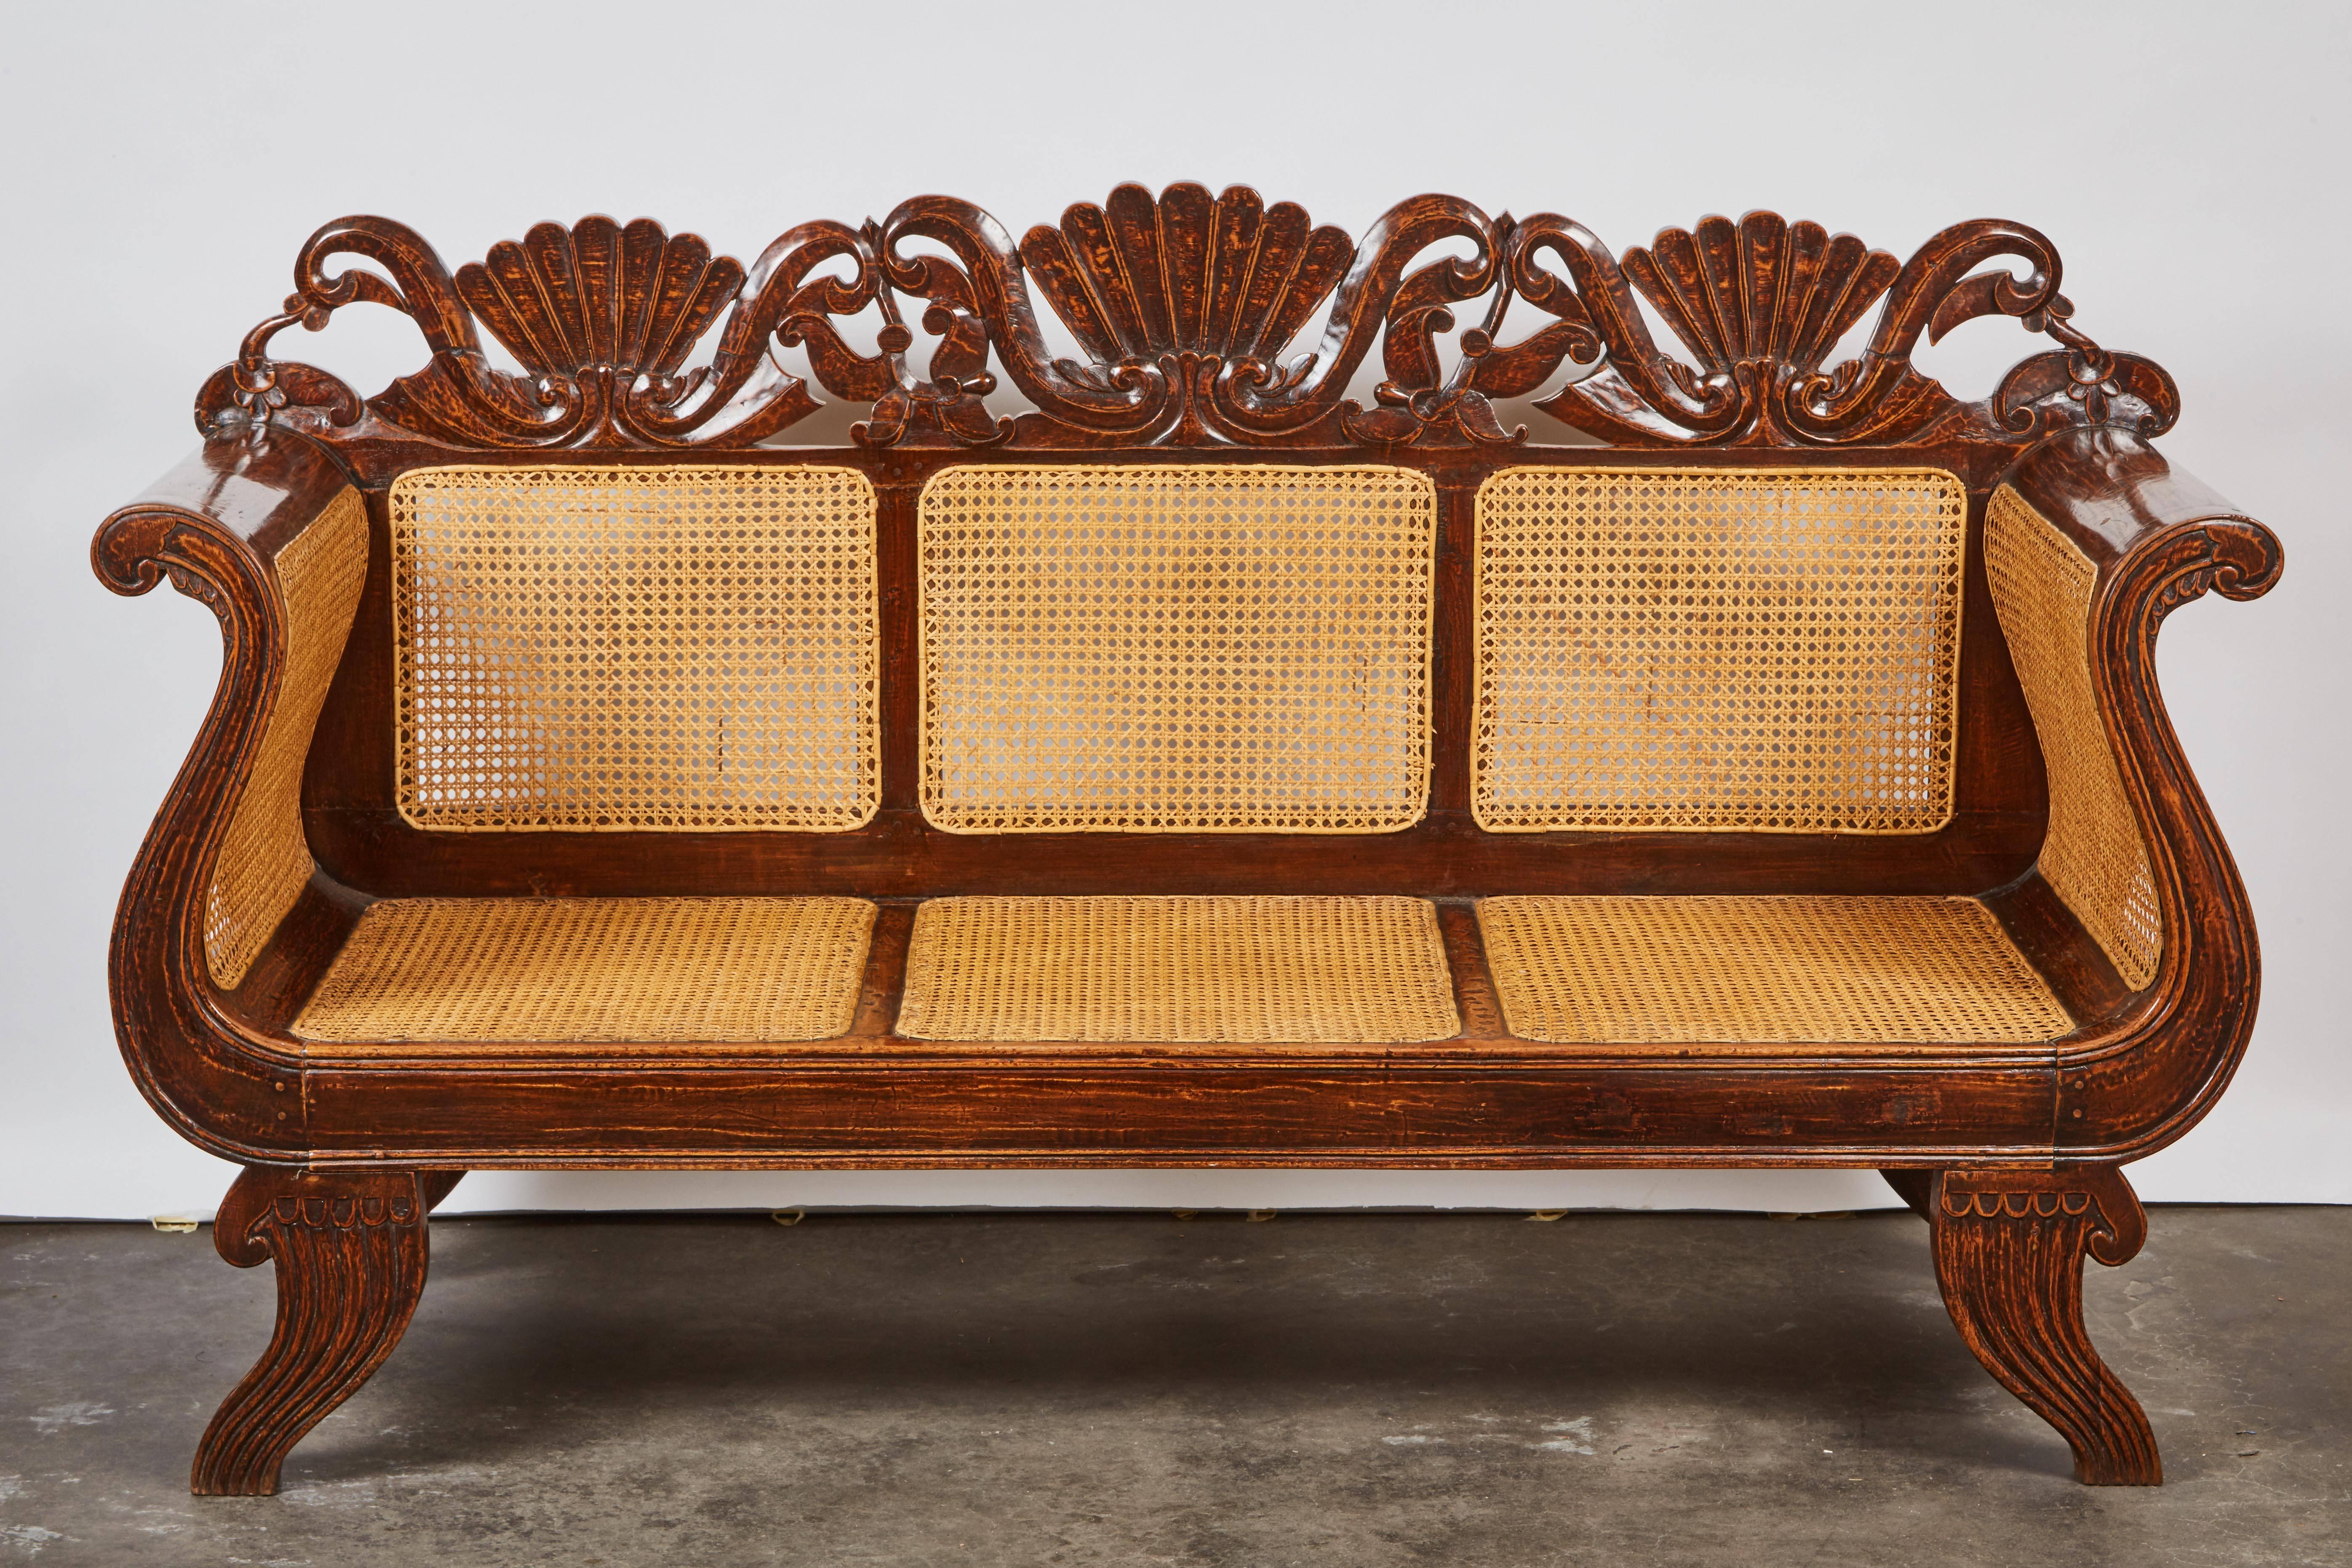 A beautiful Indonesian teak settee with a crest rail featuring carved rocaille or foliage motifs, large in scale. The back features three inset caned panels above a wicker caned seat. Dutch colonial.